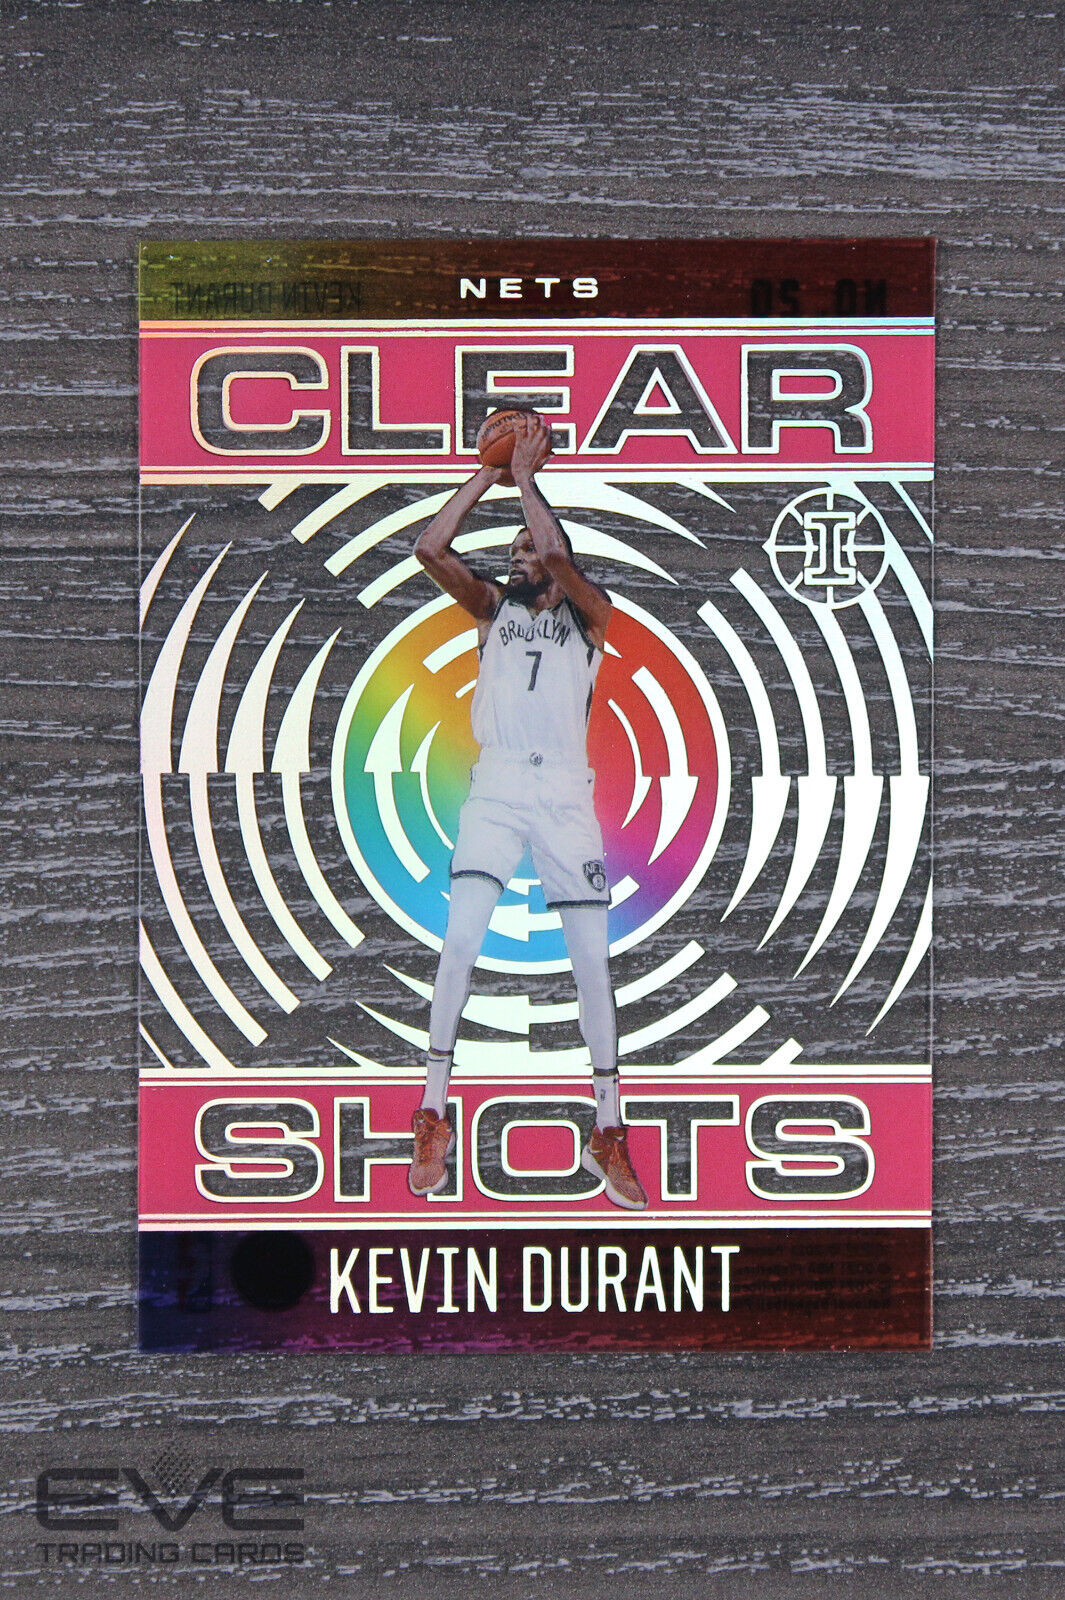 2020-21 Panini Illusions NBA Card #20 Kevin Durant Clear Shots Acetate Pink NM/M